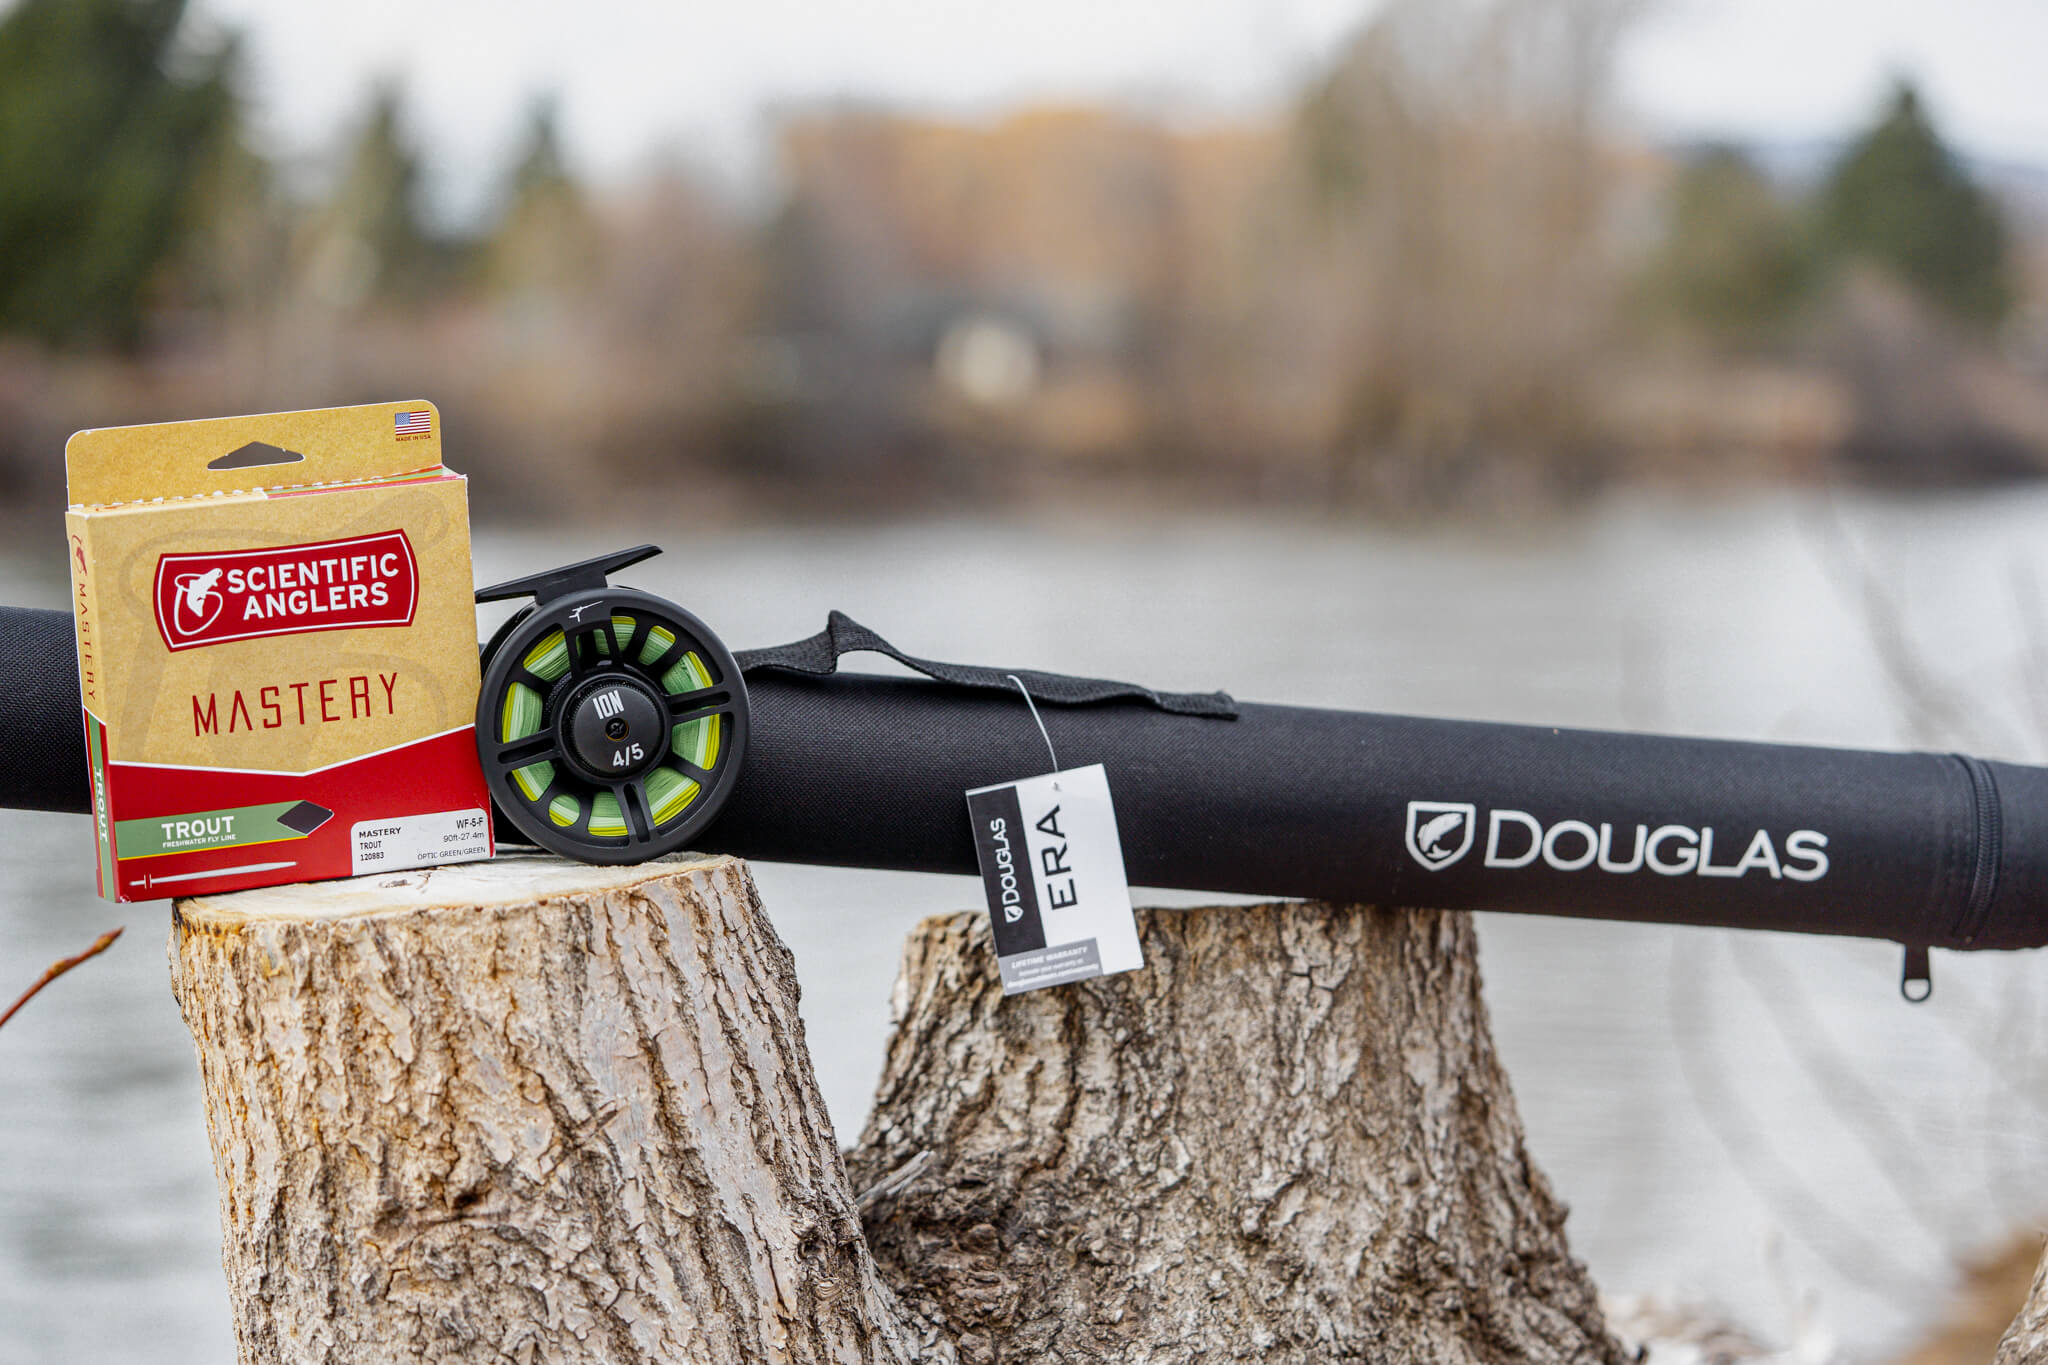 What is a Fly Fishing Zinger and How to Use Them - Guide Recommended